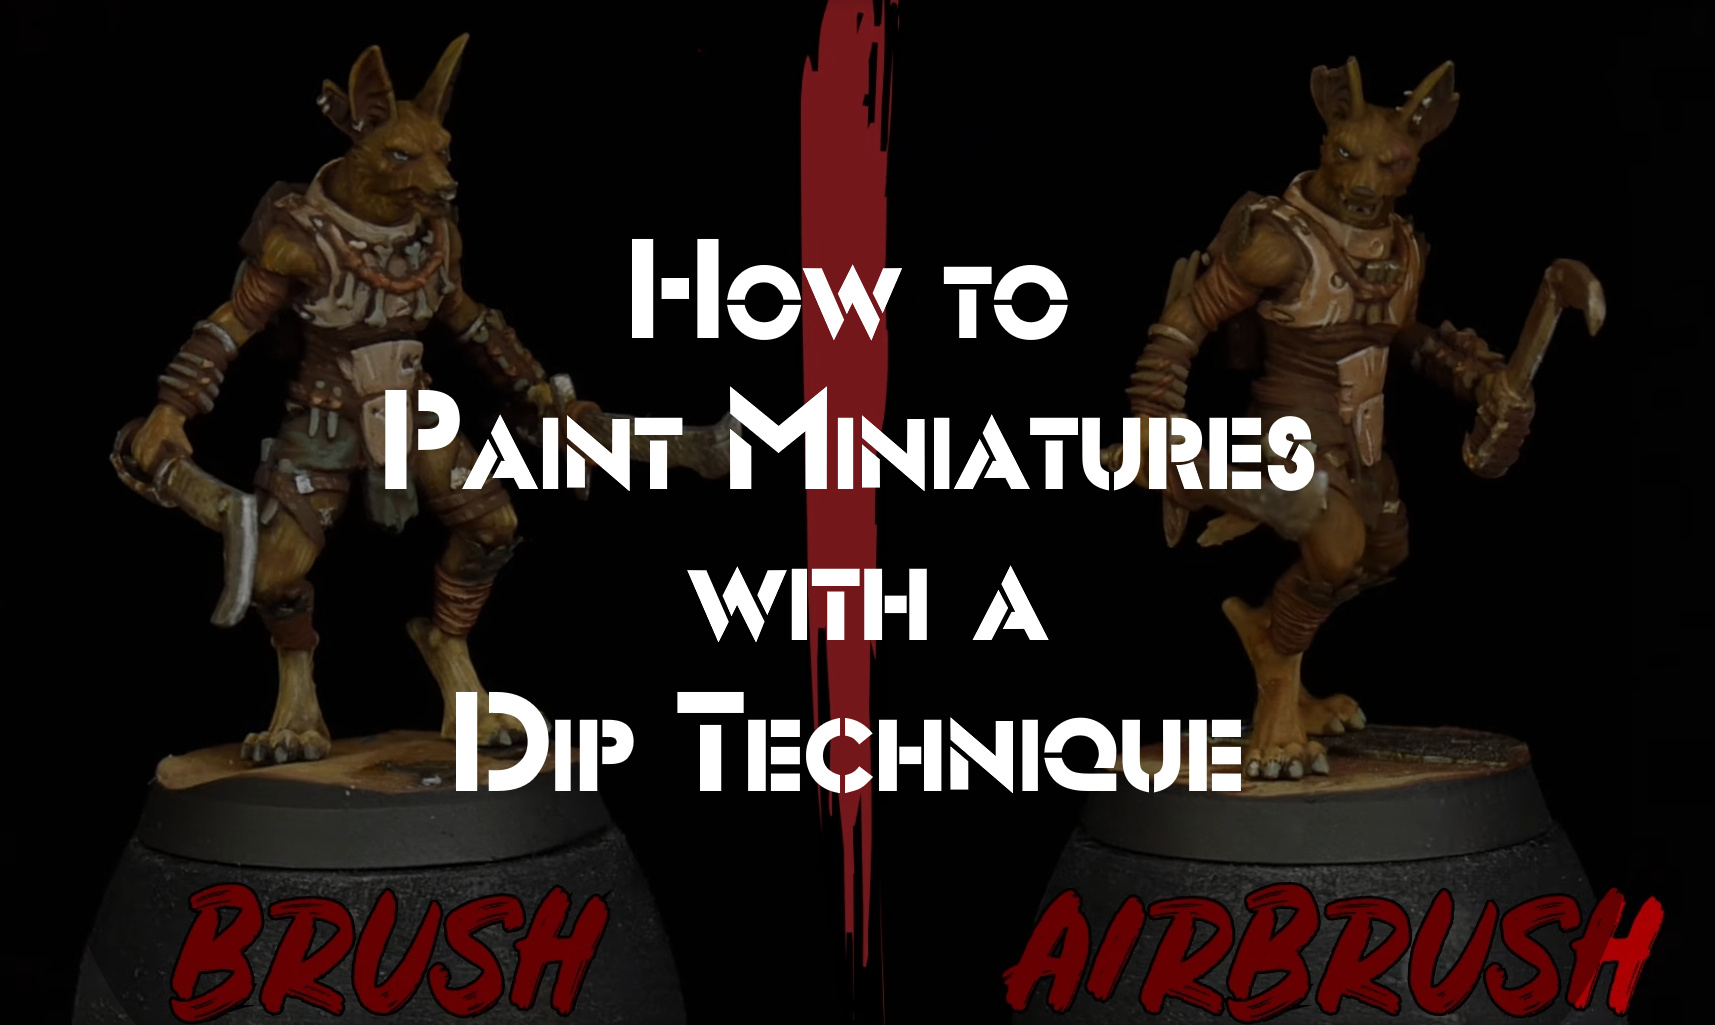 How to Paint Miniatures with a Dip Technique (Paint Dipping)